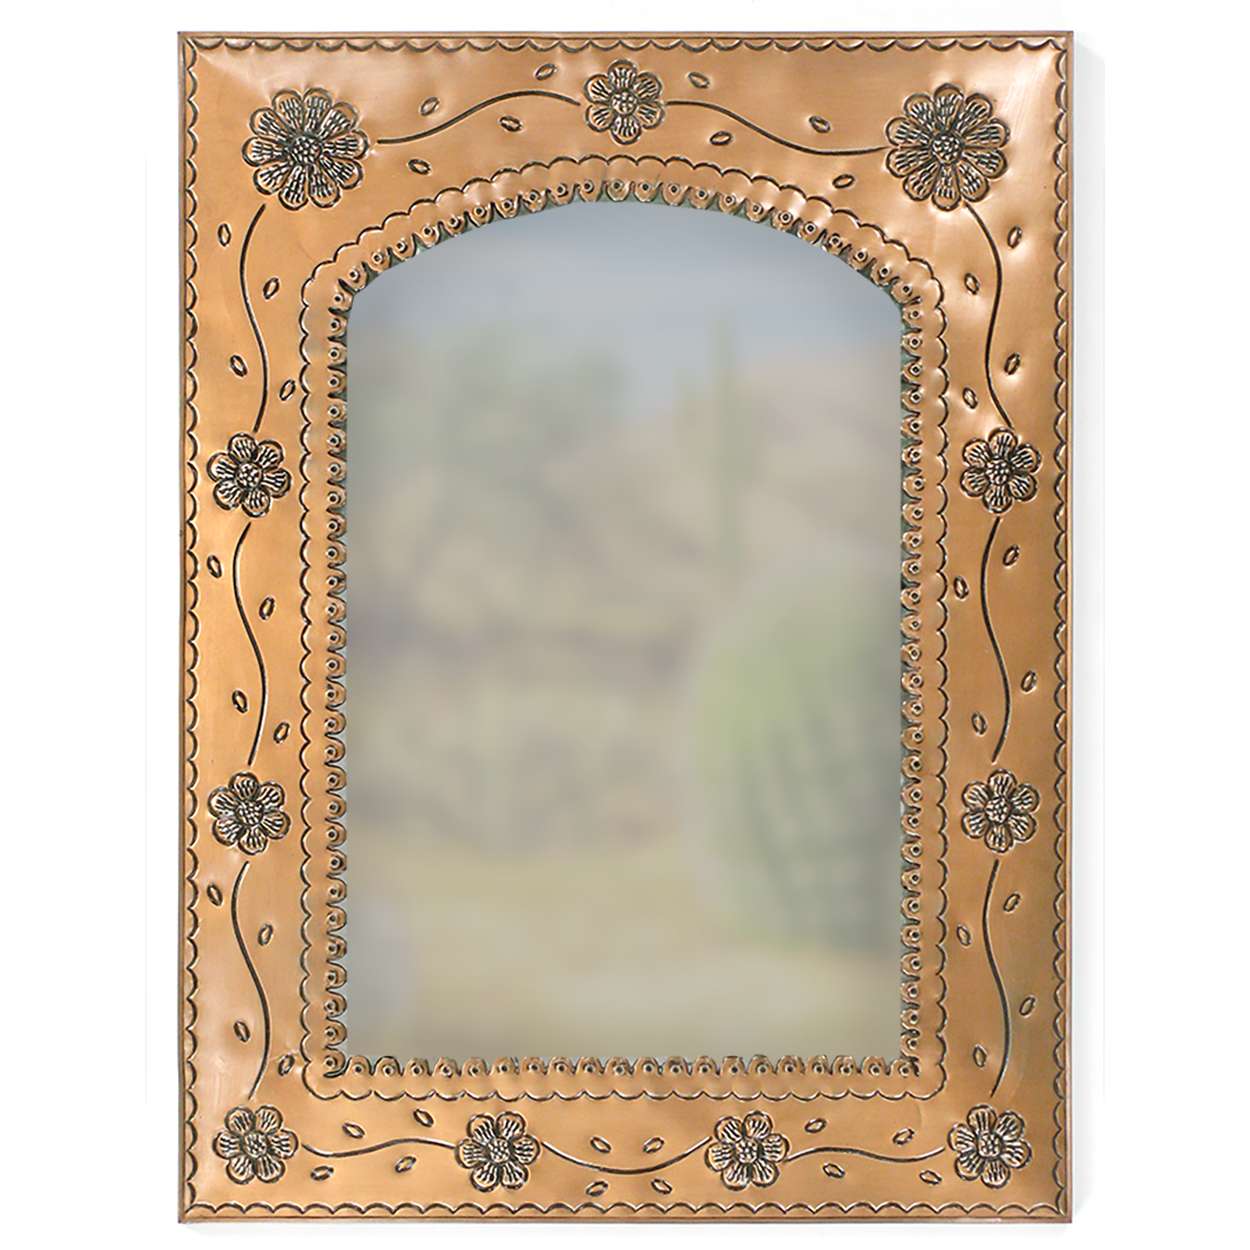 Flower Punched Mirror - 30in x 23in - Copper Finish